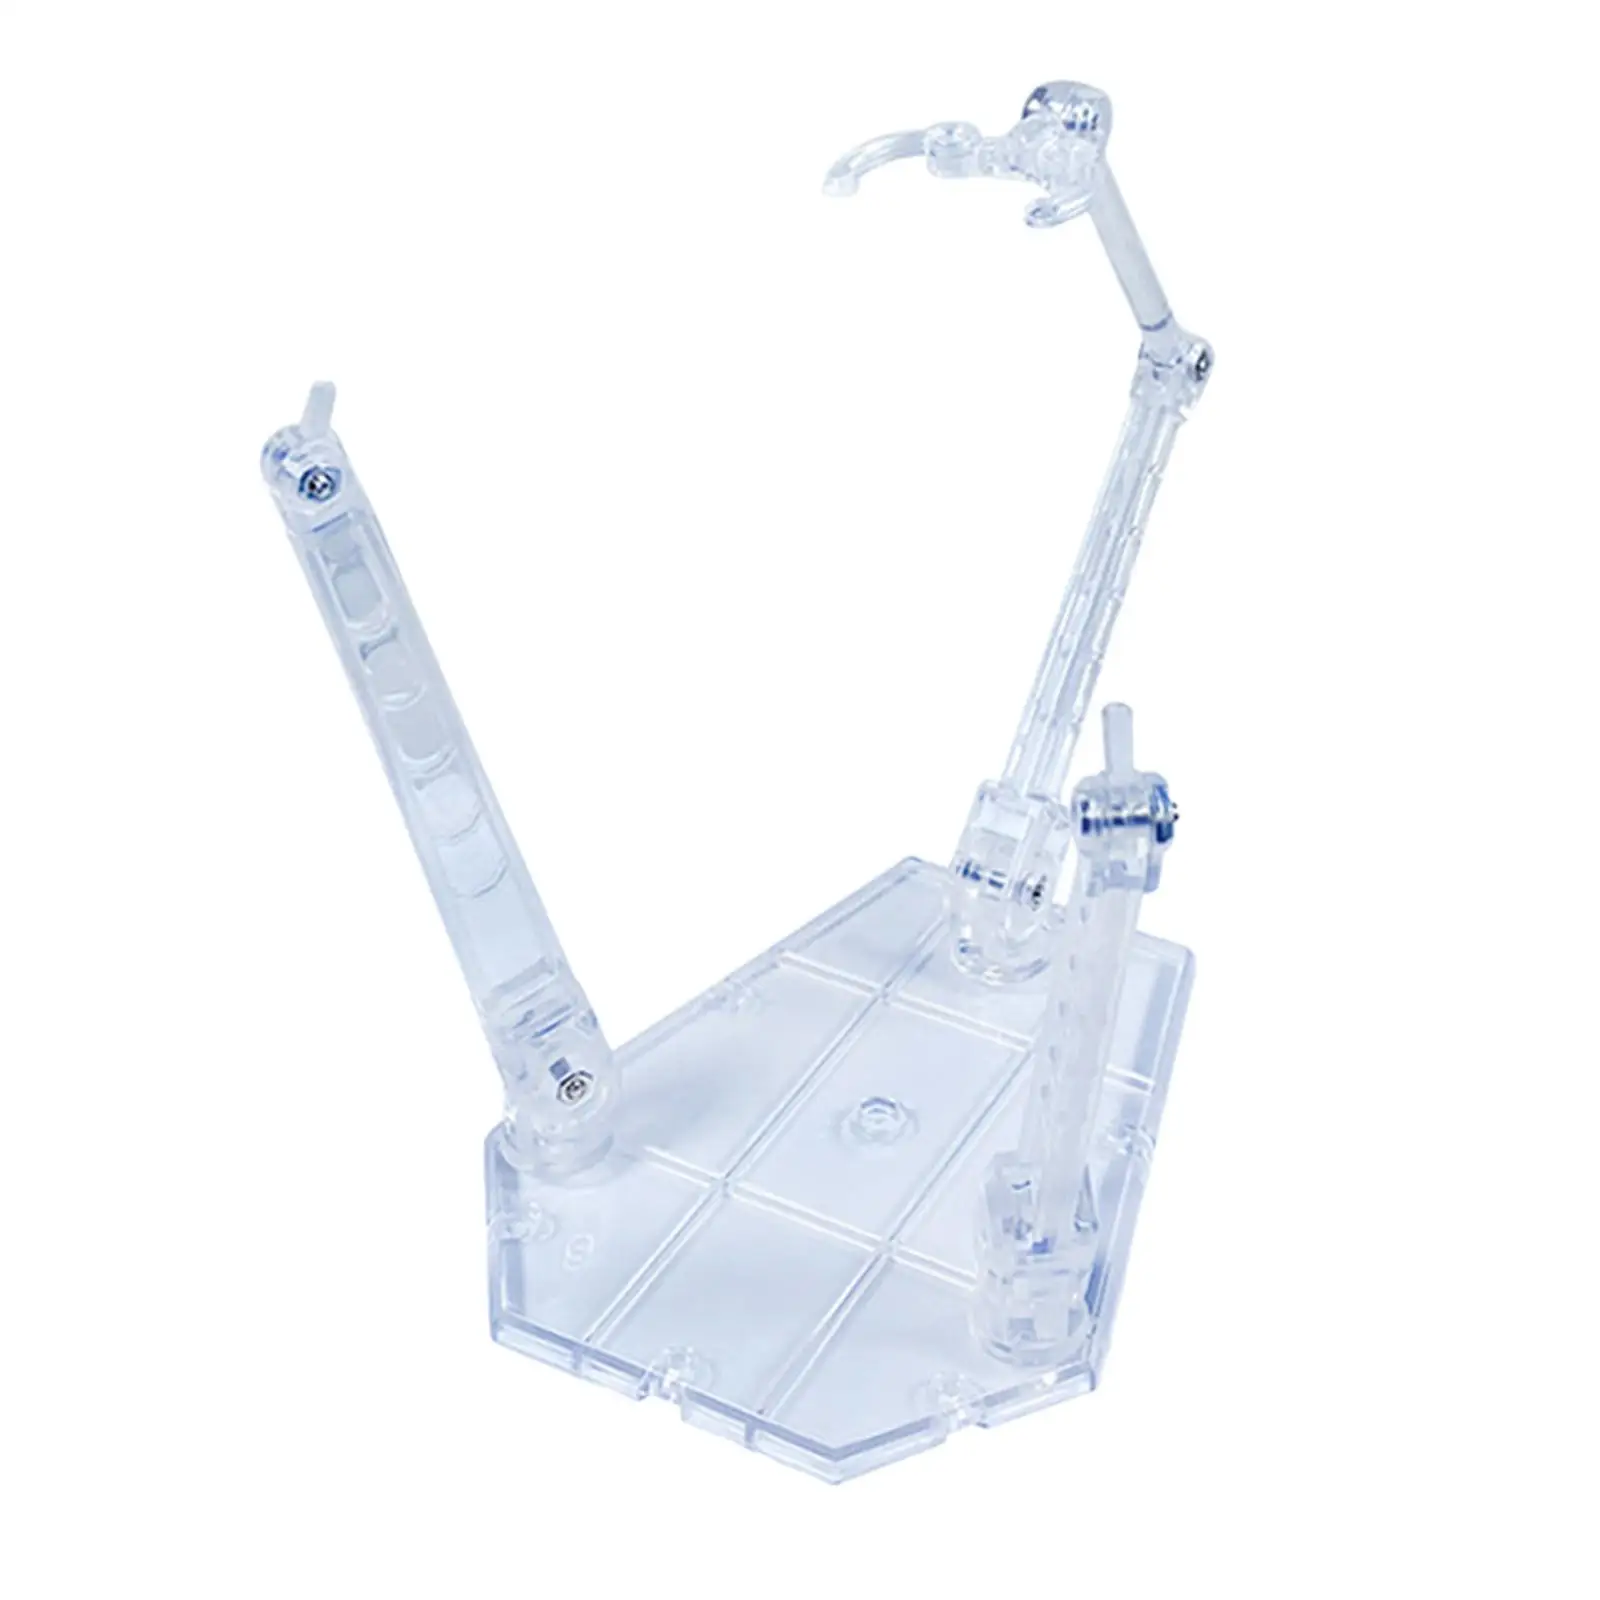 Action Figure Display Holder Base Portable Clear Display Stand for Children